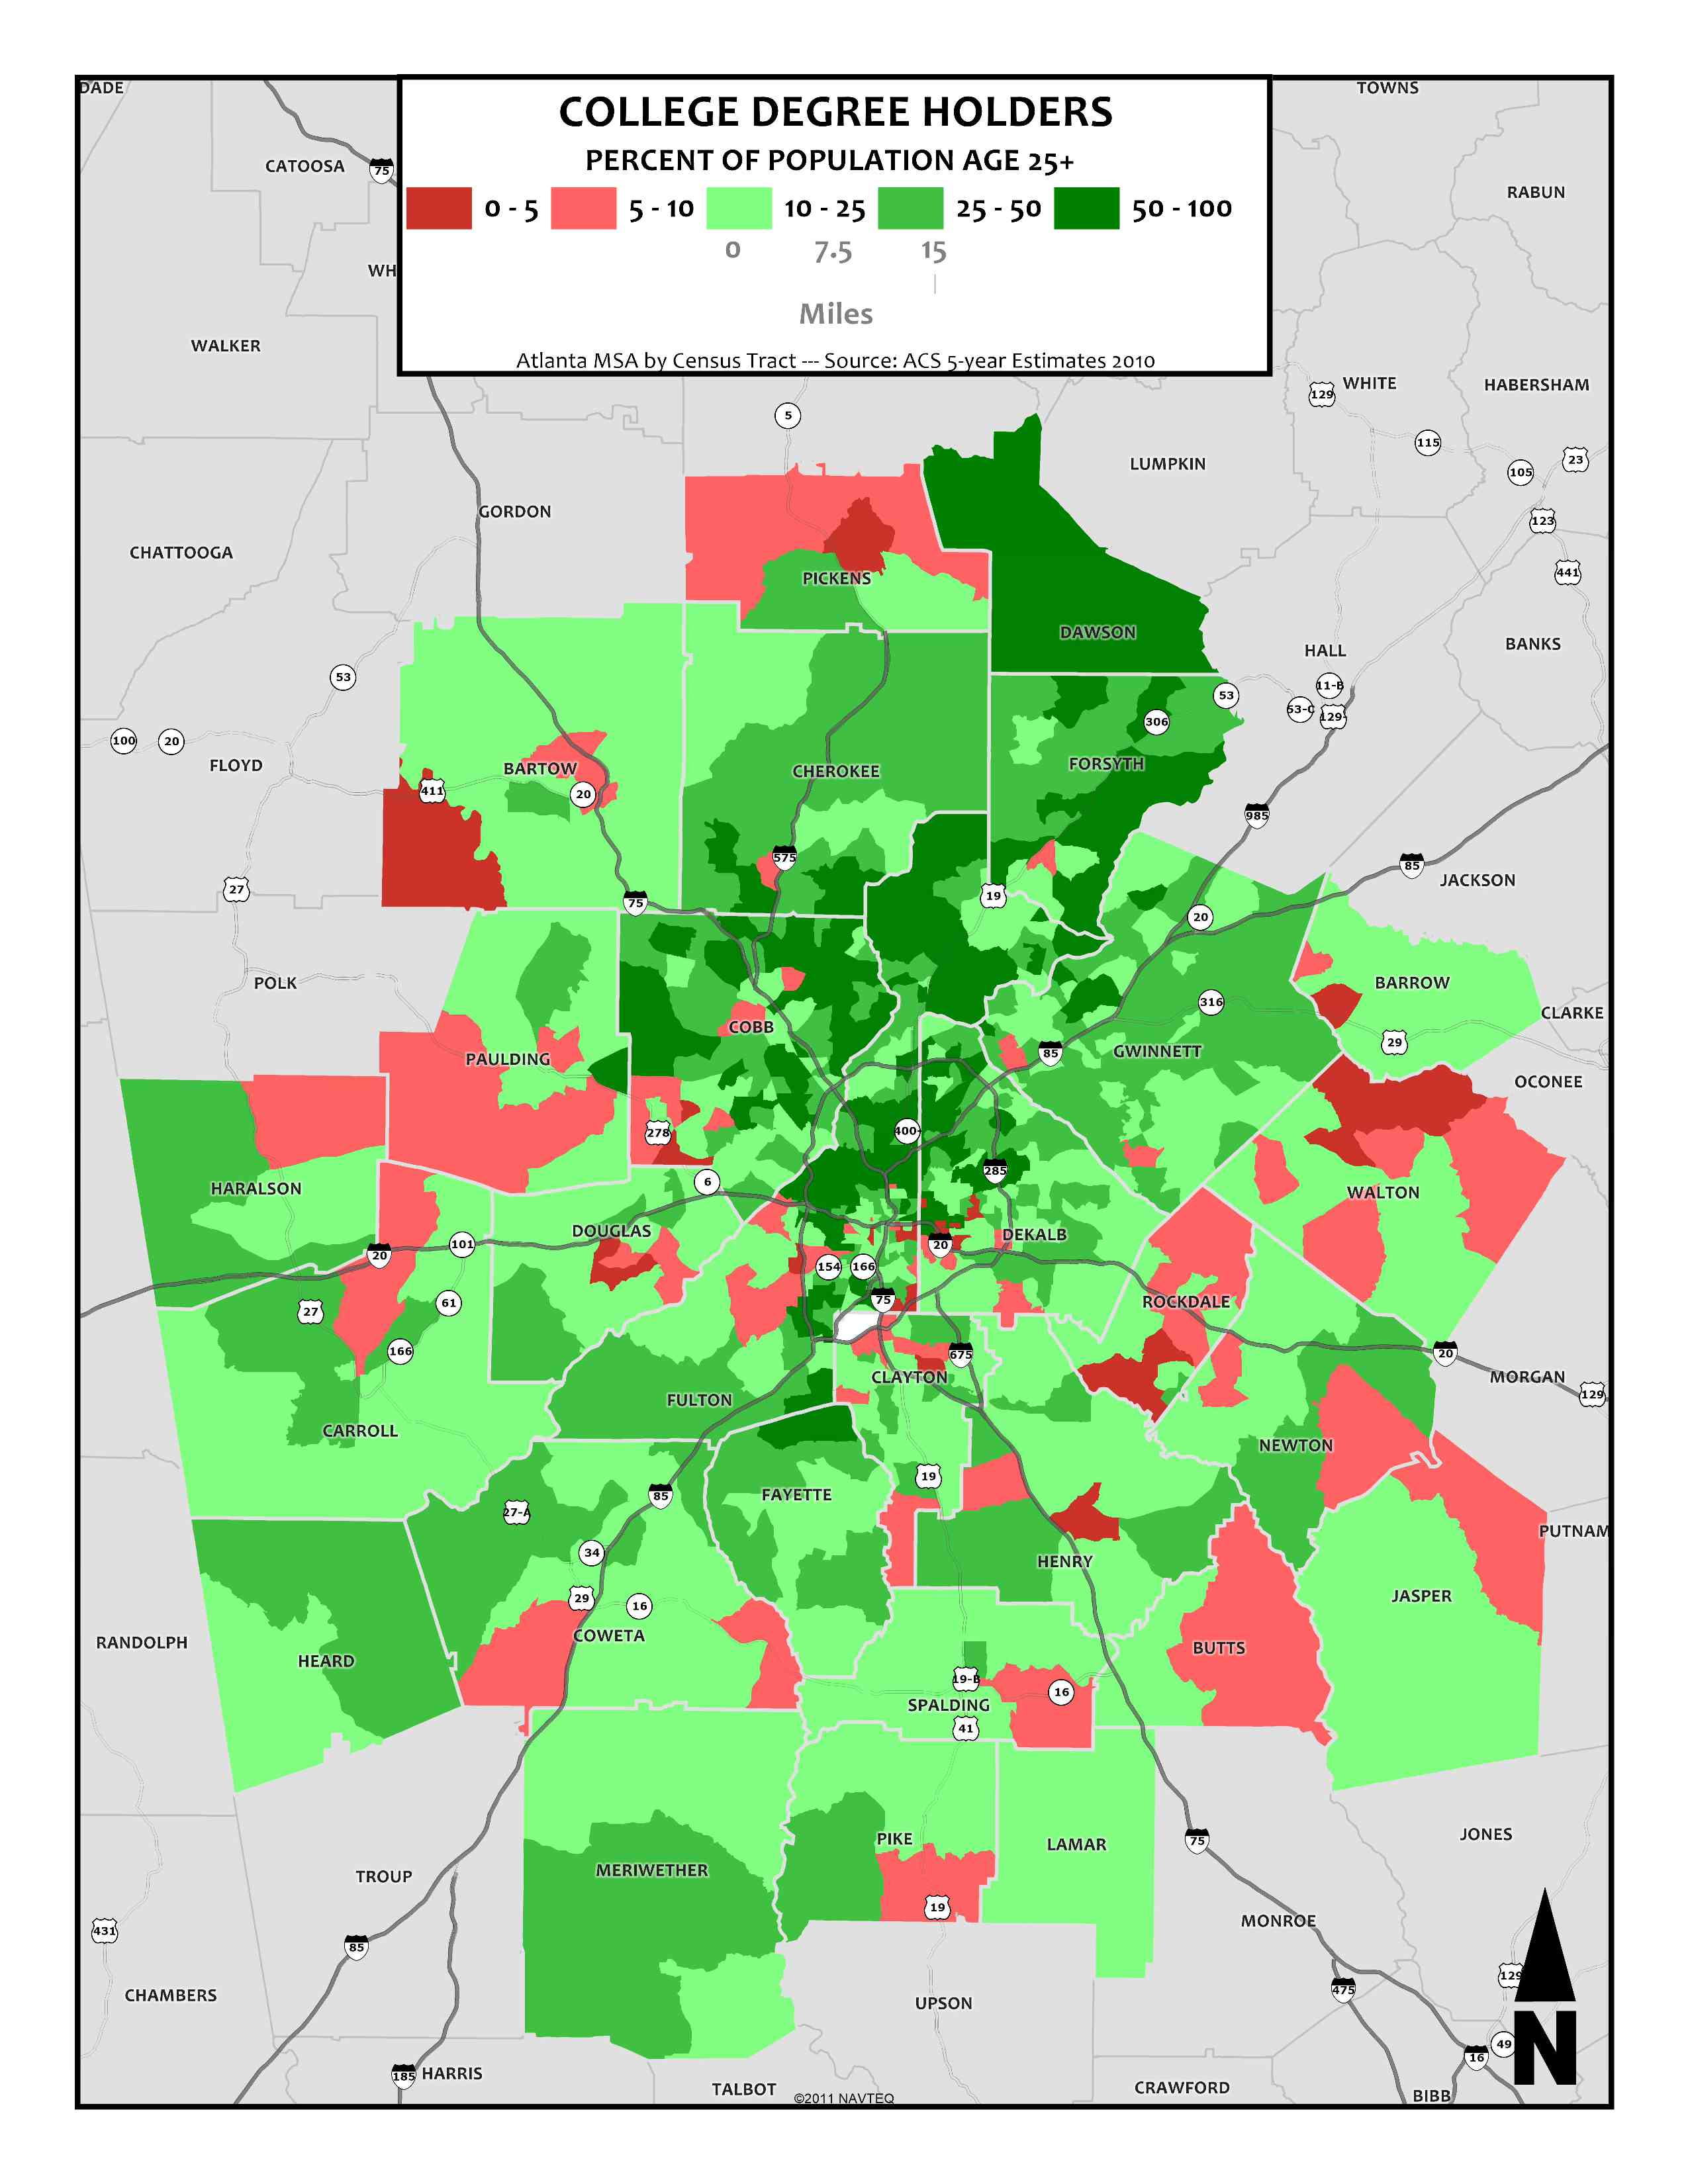 College Degree Holders, 2010 – 28-County Census Tracts